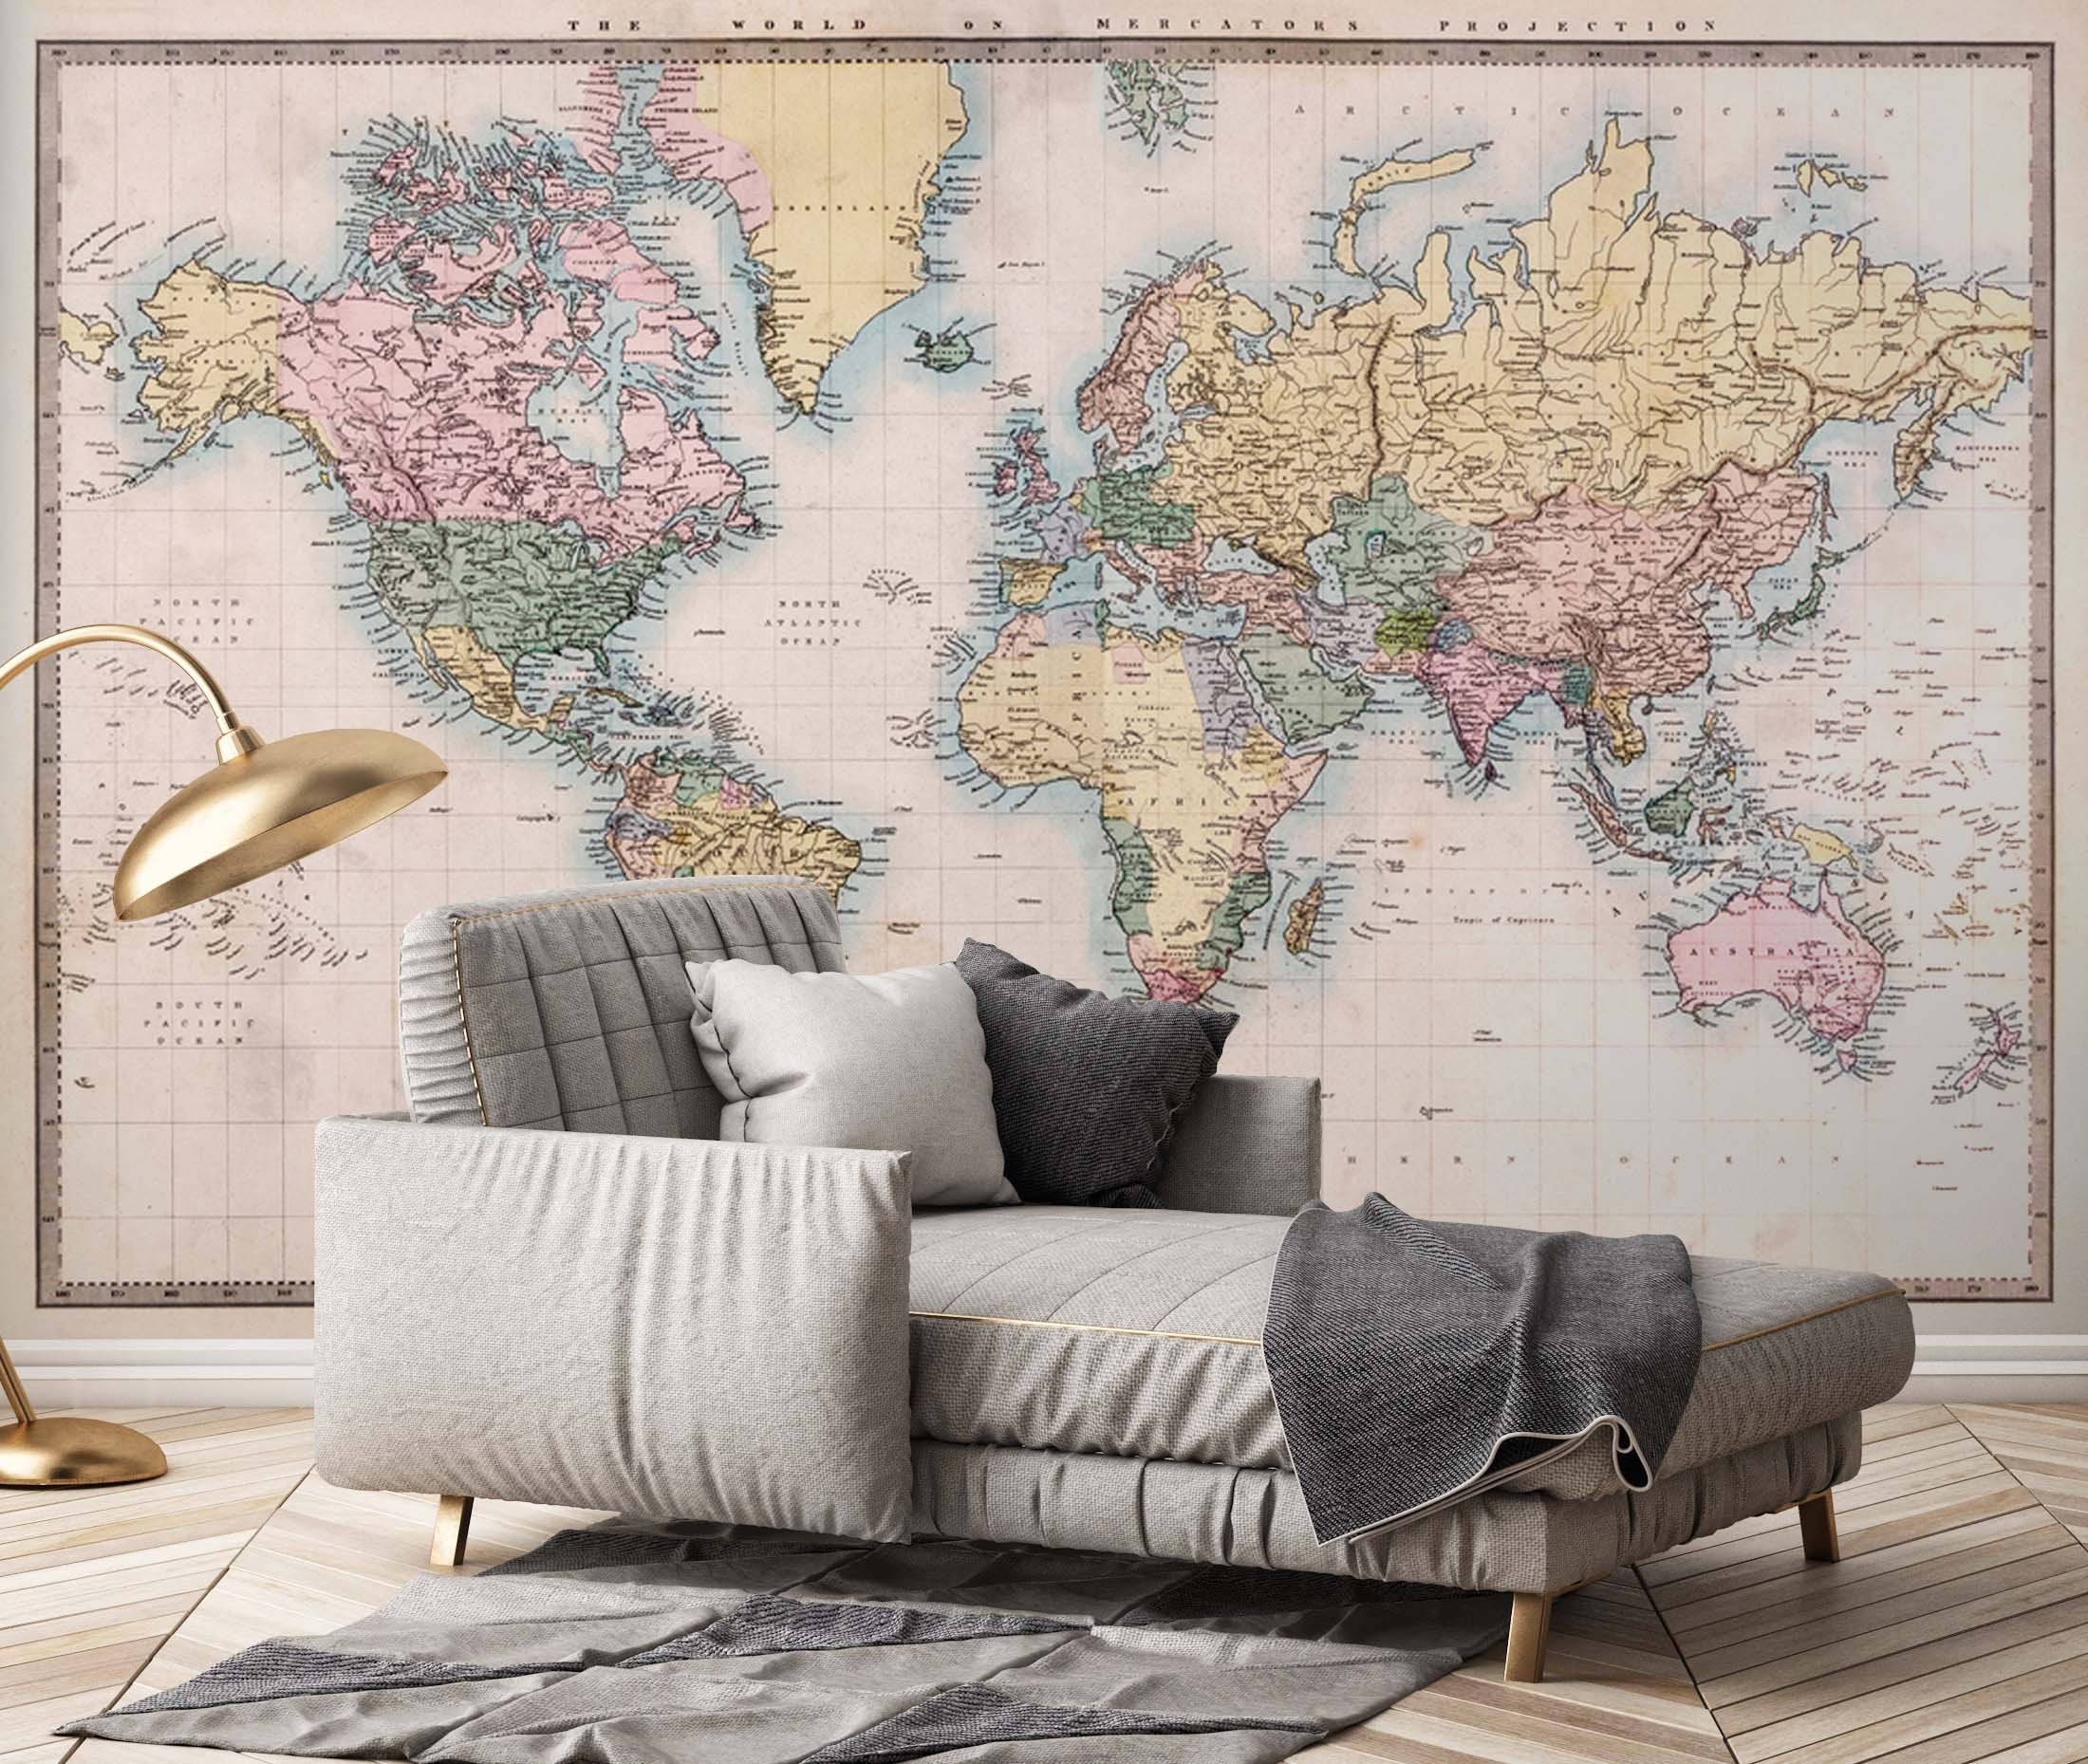 Colorful Old World Map Wallpaper Restaurant Cafe Office Bedroom Living Room Mural Home Decor Wall Art